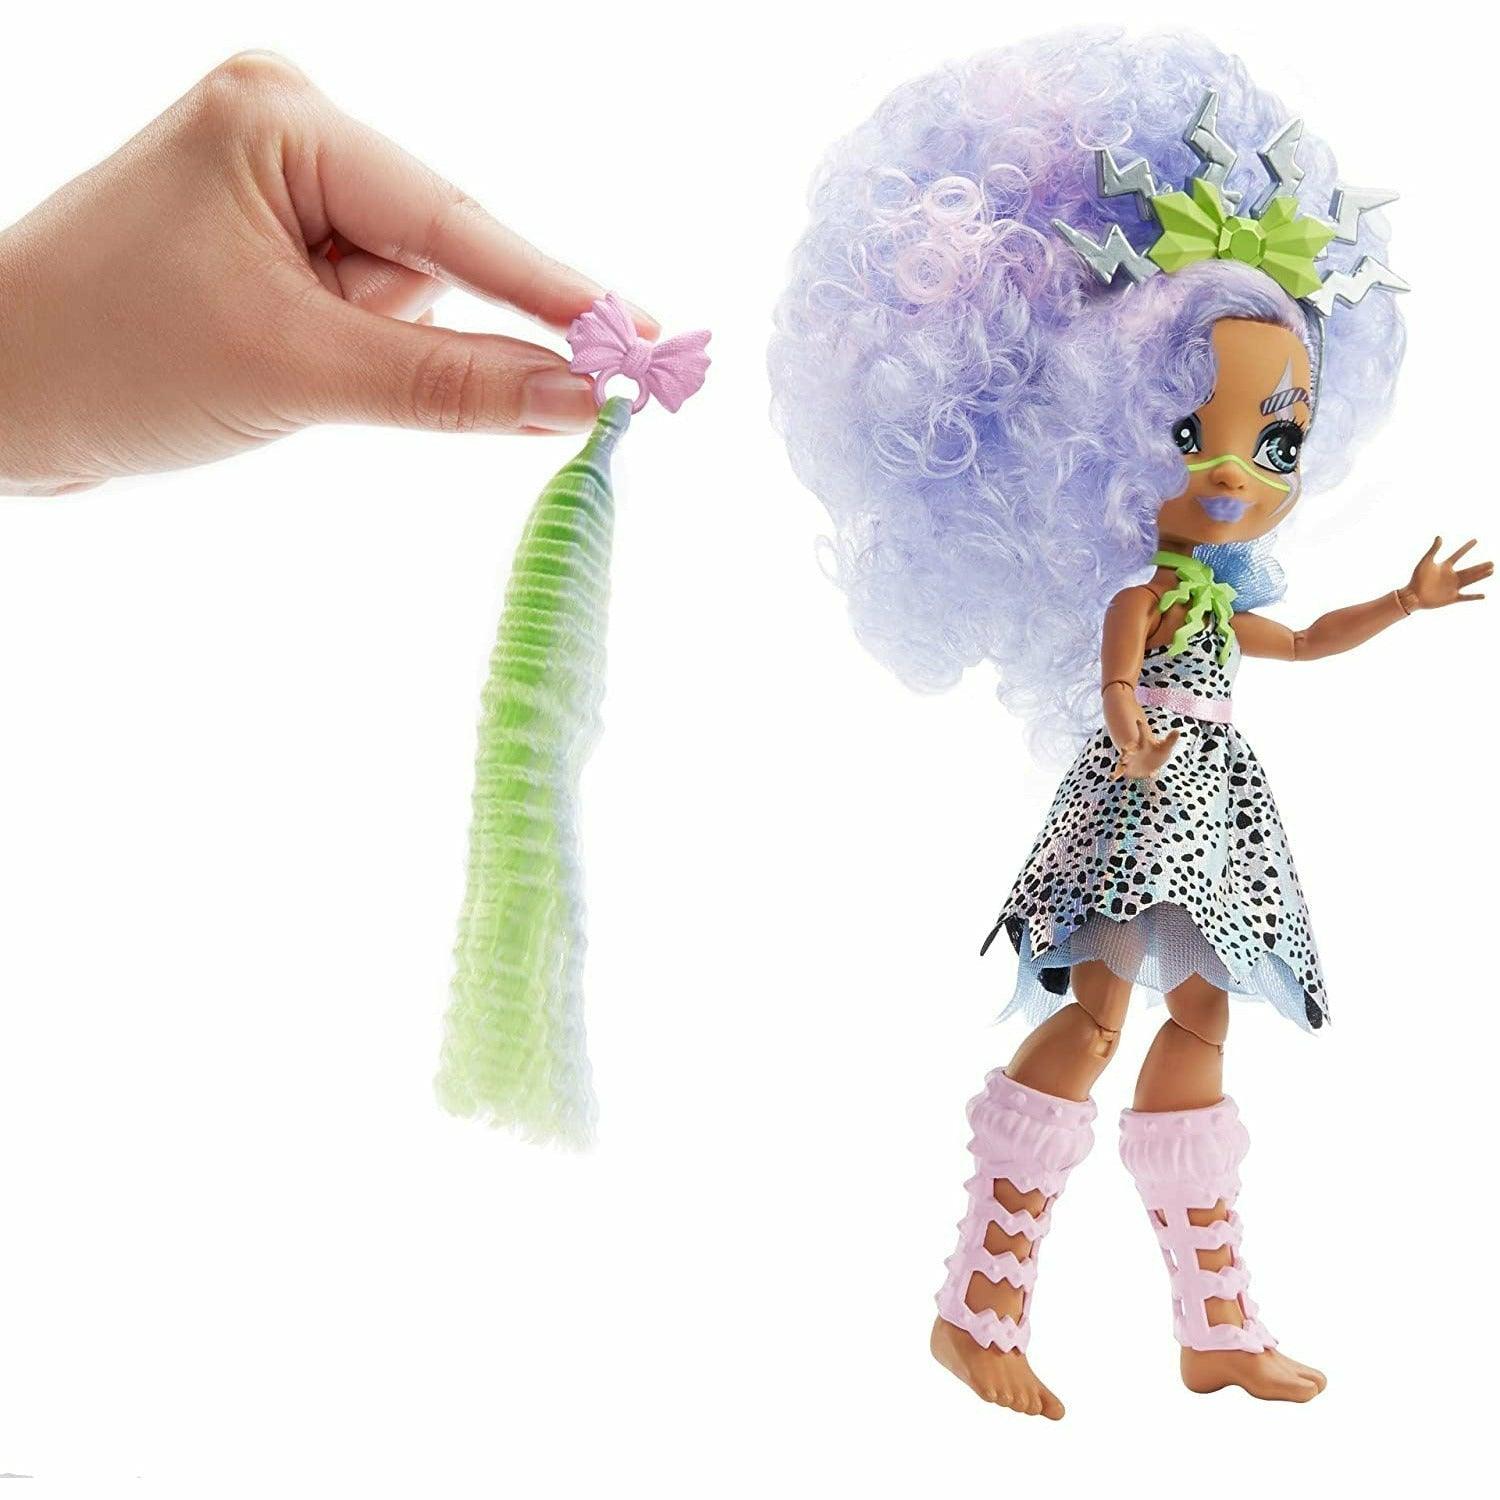 Cave Club Bashley Doll (8 - 10-inch, Lavender Hair) Poseable Prehistoric Fashion Doll with Dinosaur Pet and Accessories - BumbleToys - 4+ Years, 5-7 Years, Dolls, Fashion Dolls & Accessories, Girls, OXE